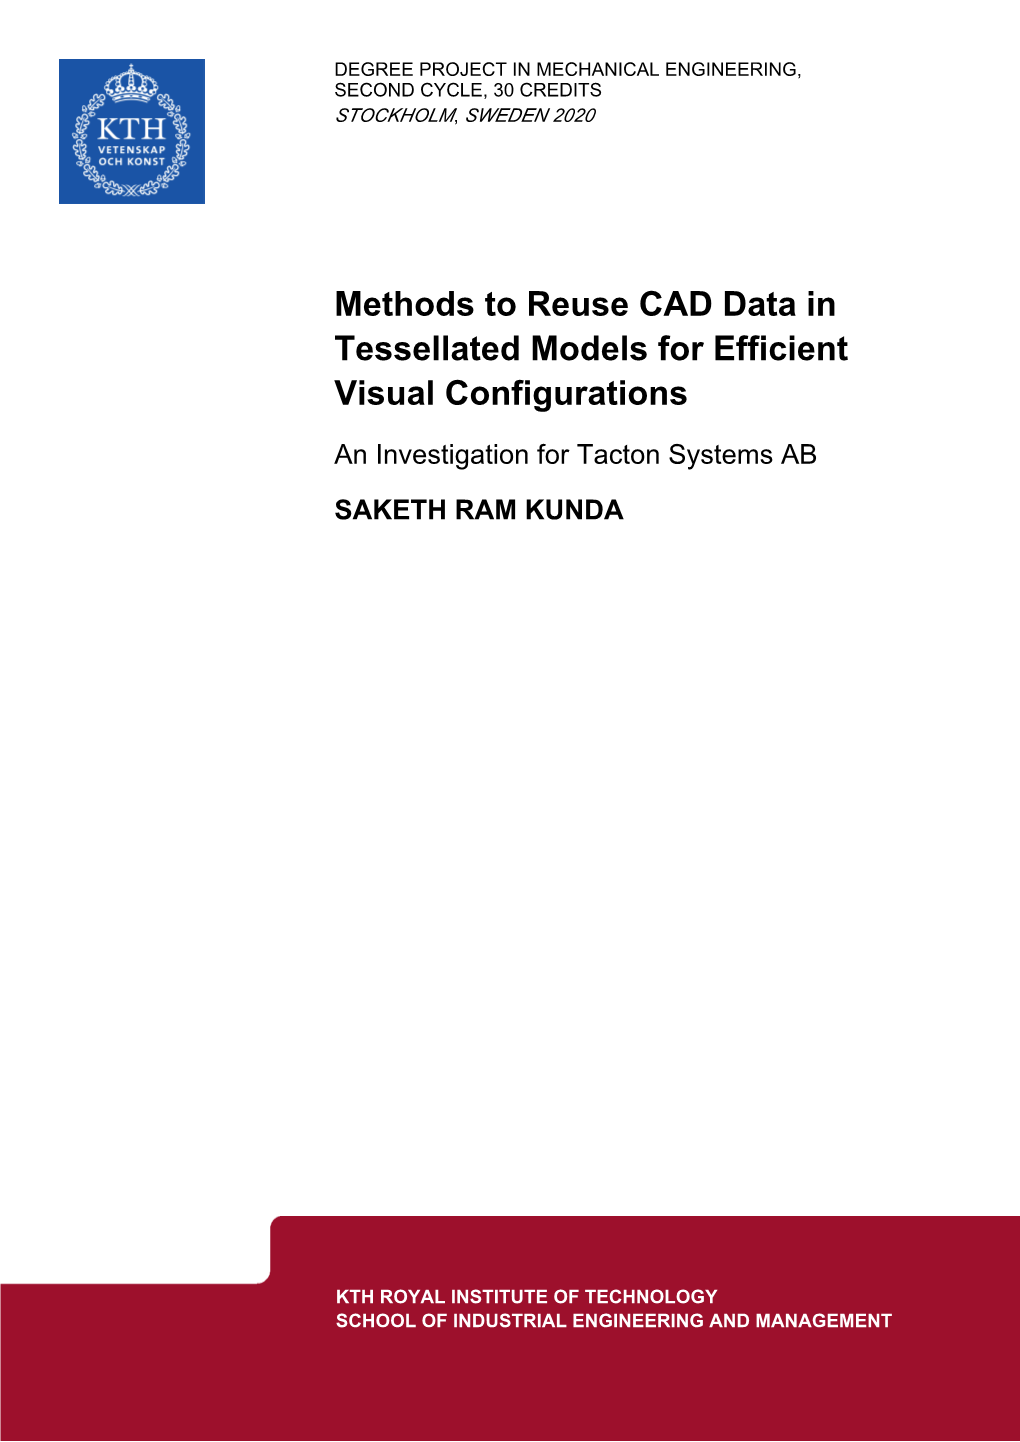 Methods to Reuse CAD Data in Tessellated Models for Efficient Visual Configurations